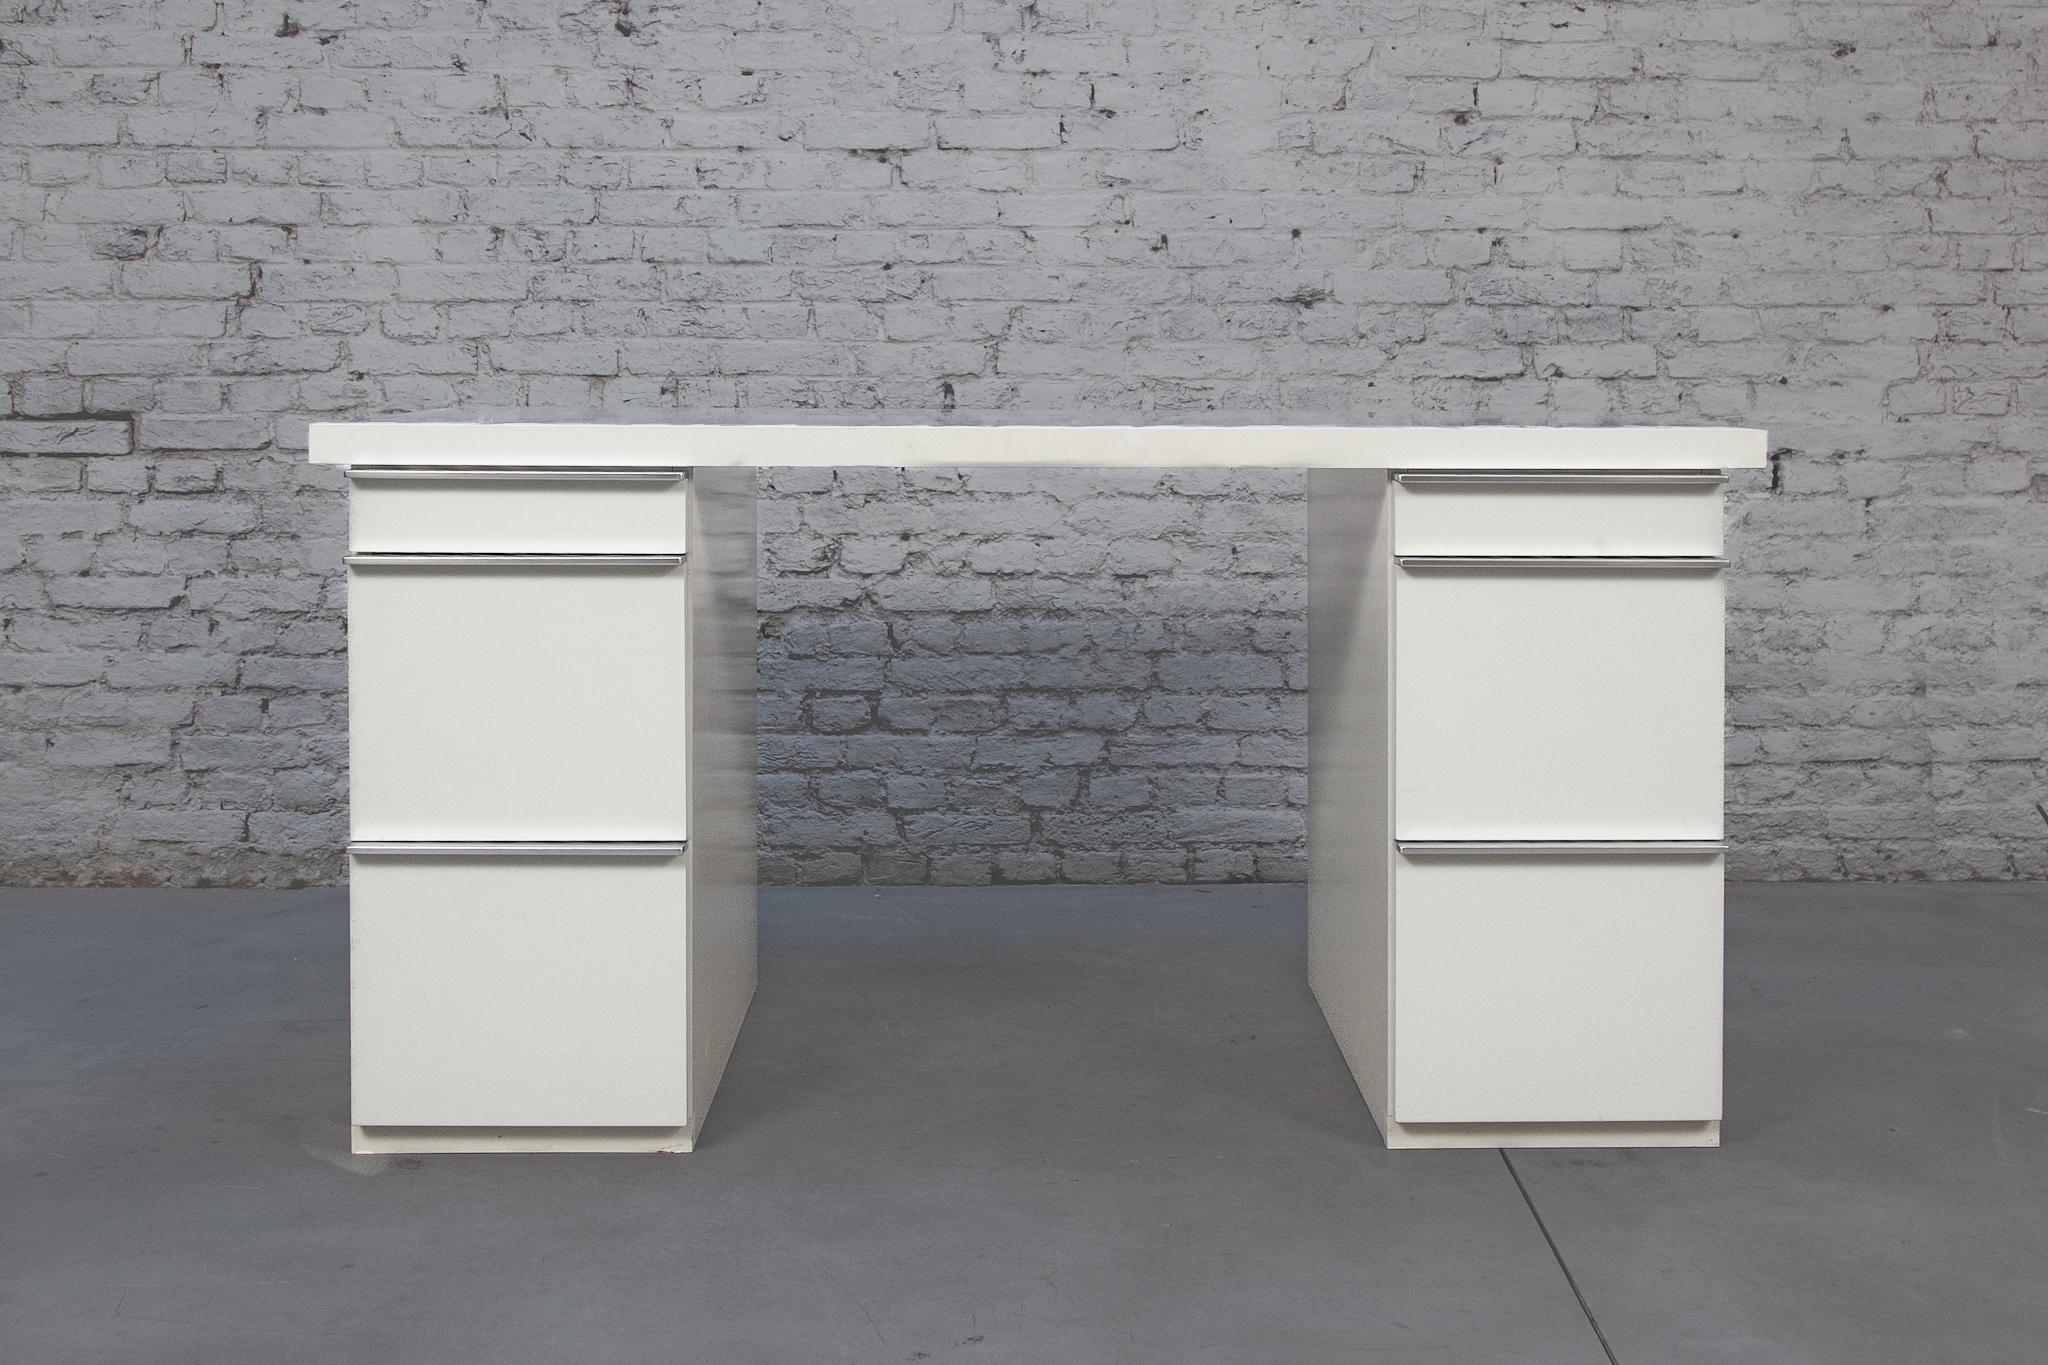 Post modern white laminate Interlübke desk beautiful, simple, sleek design that can stand freely in a spacious room or is also suitable for a small space.
The desk offers space for many storage options in the 6 drawers..In original very good